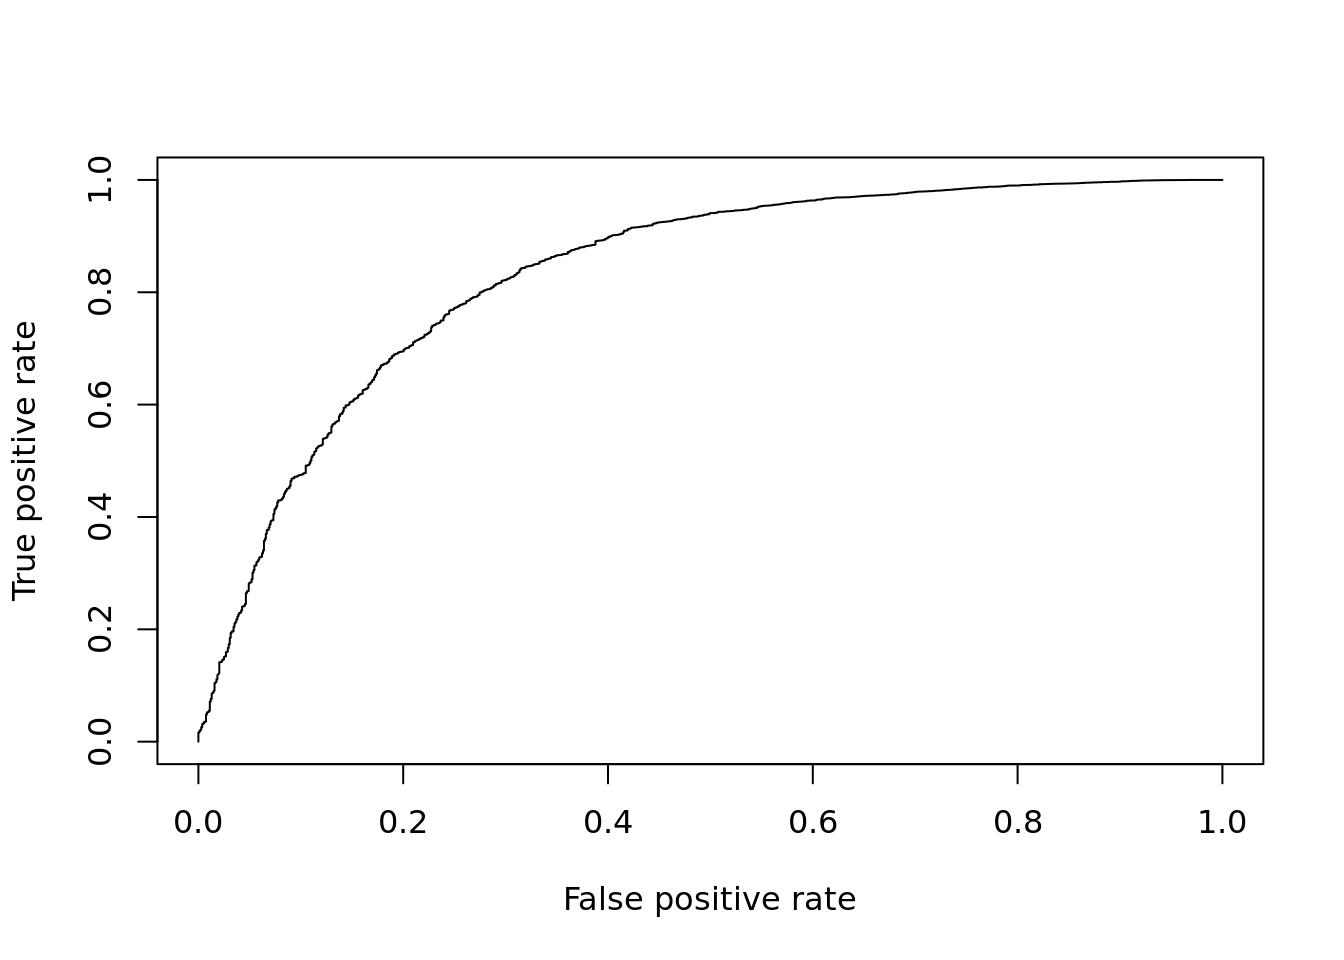 ROC curve for Wilcox test.